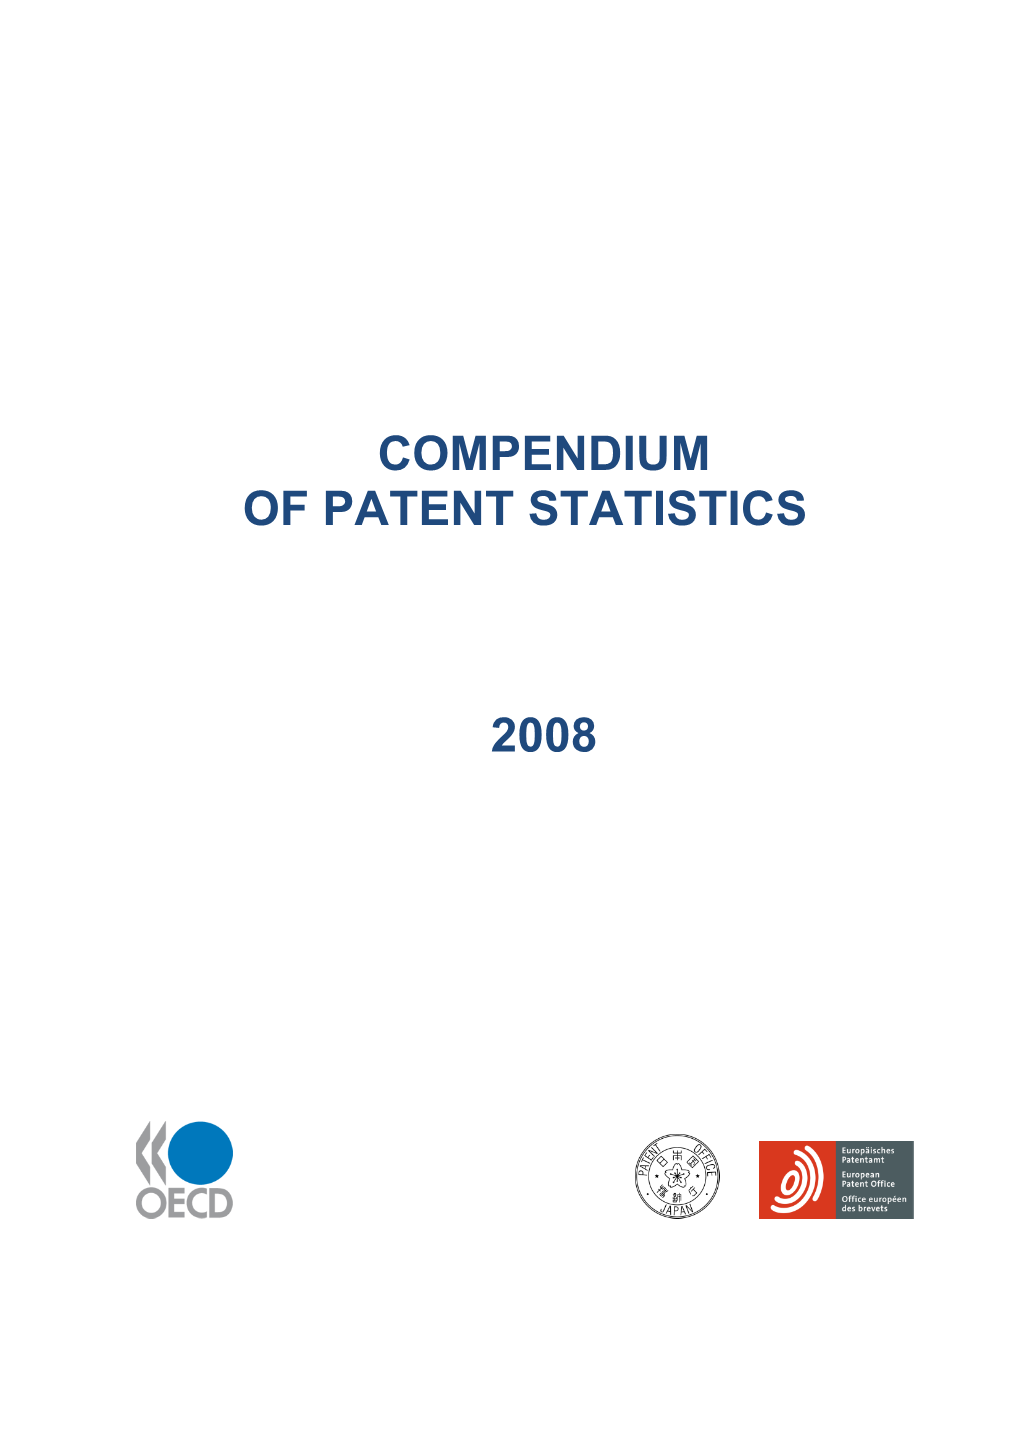 Compendium of Patent Statistics 2008 Provides a Snapshot of the Latest Available Internationally Comparable Data on Patents